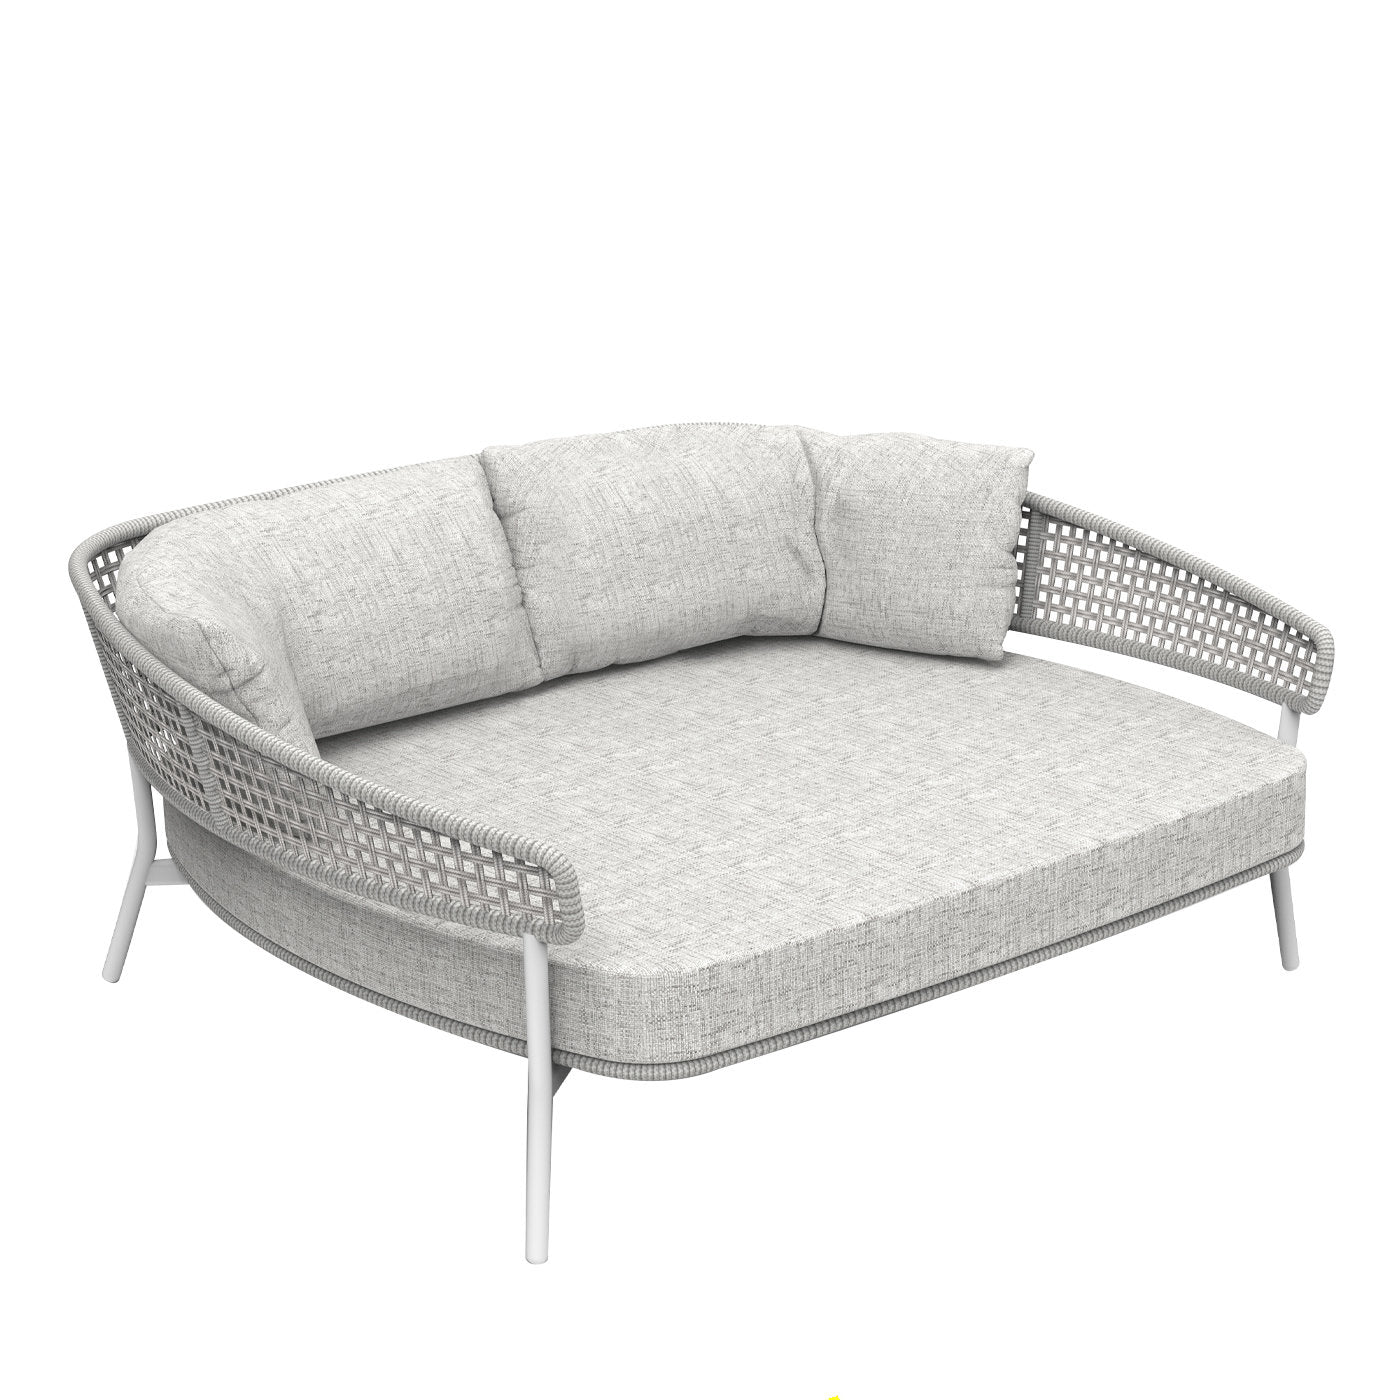 Moon Daybed Light Gray - Main view